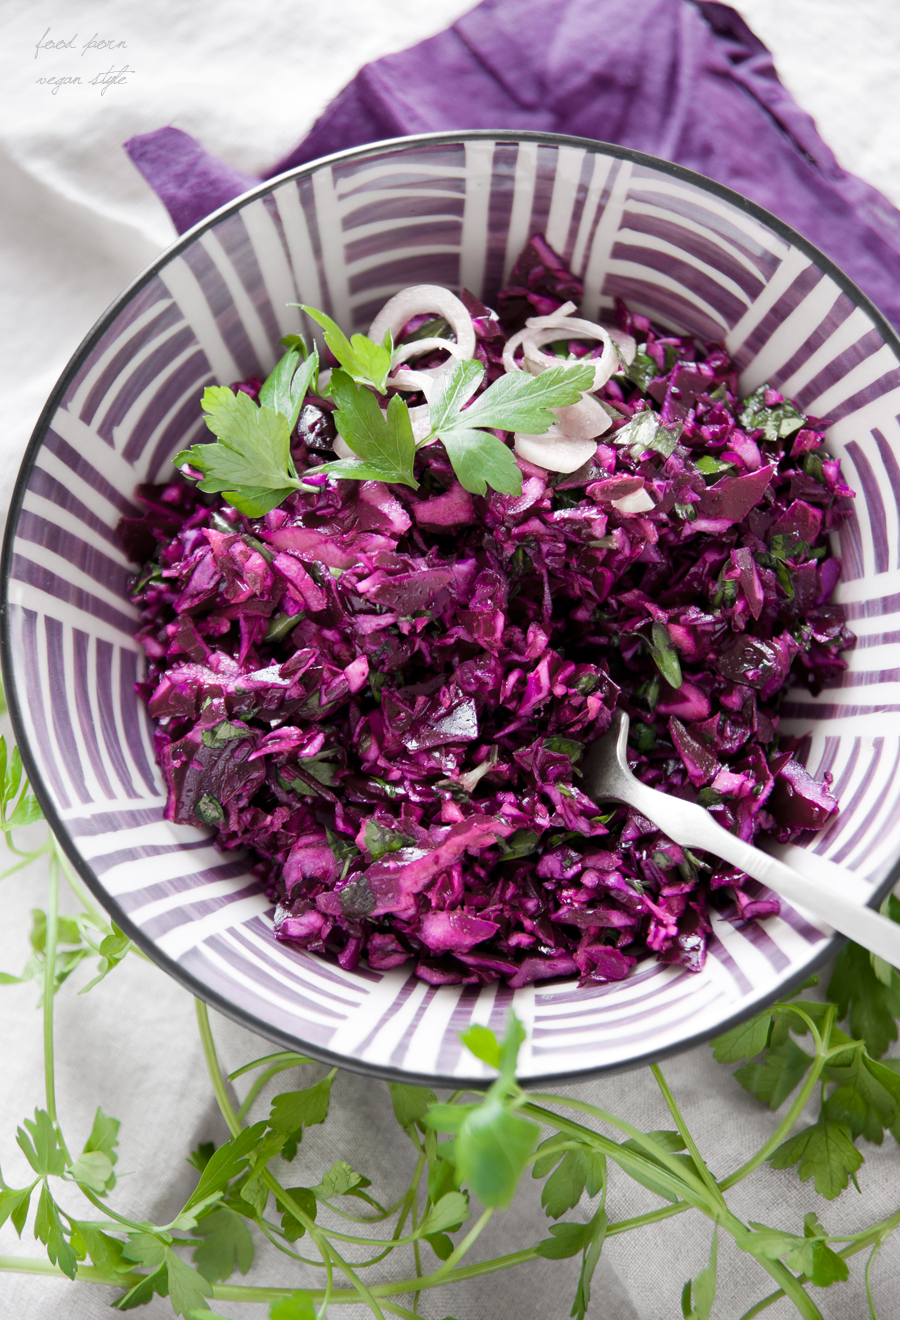 Cleansing red cabbage salad